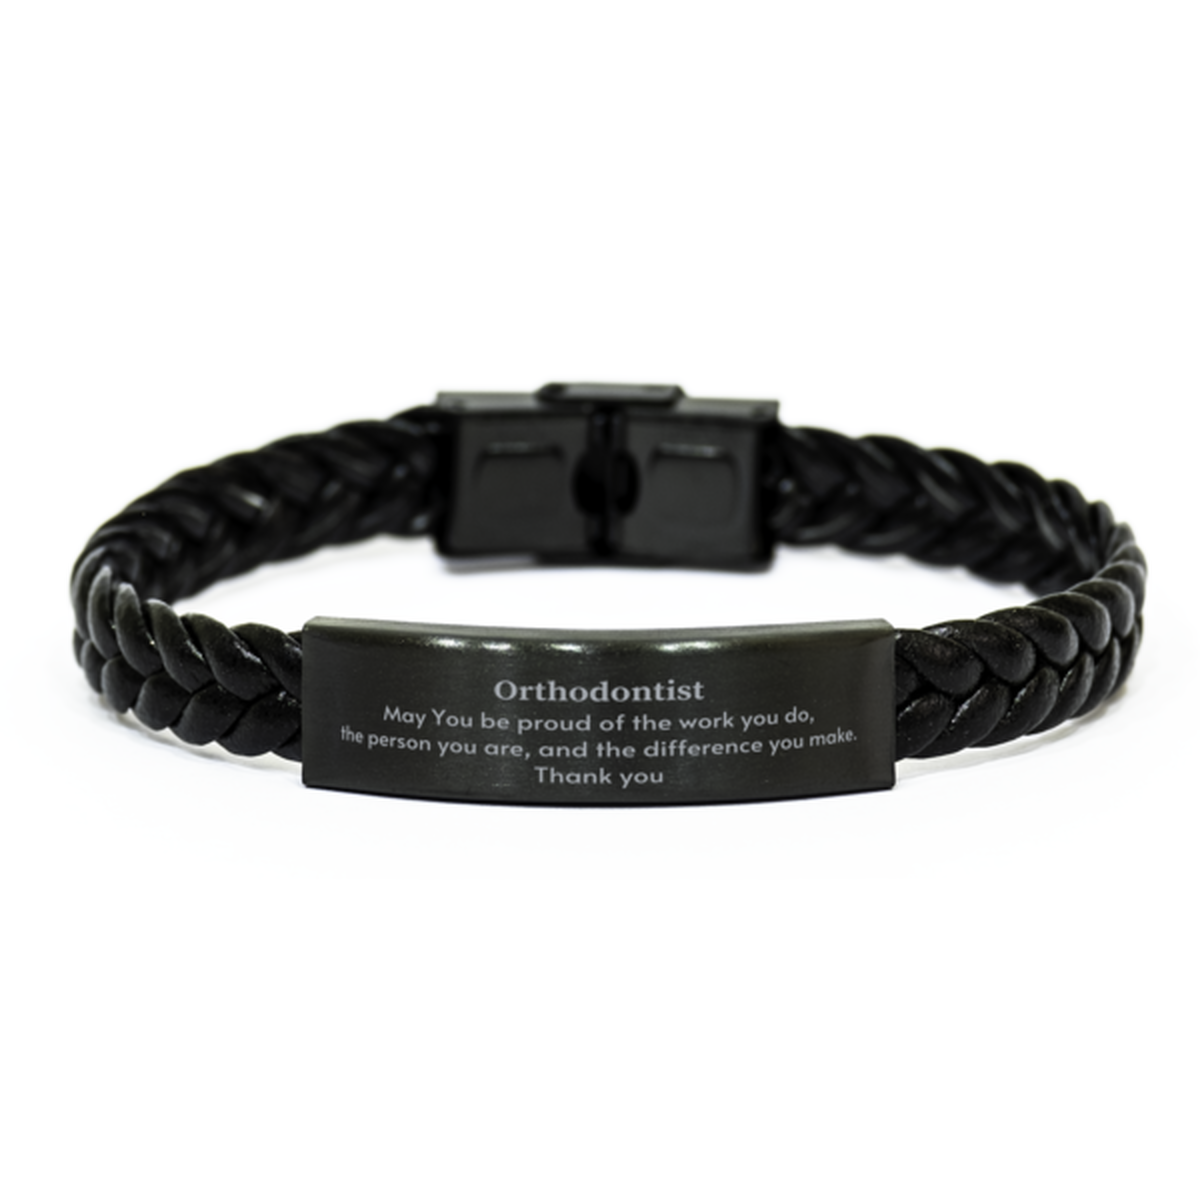 Heartwarming Braided Leather Bracelet Retirement Coworkers Gifts for Orthodontist, Orthodontist May You be proud of the work you do, the person you are Gifts for Boss Men Women Friends